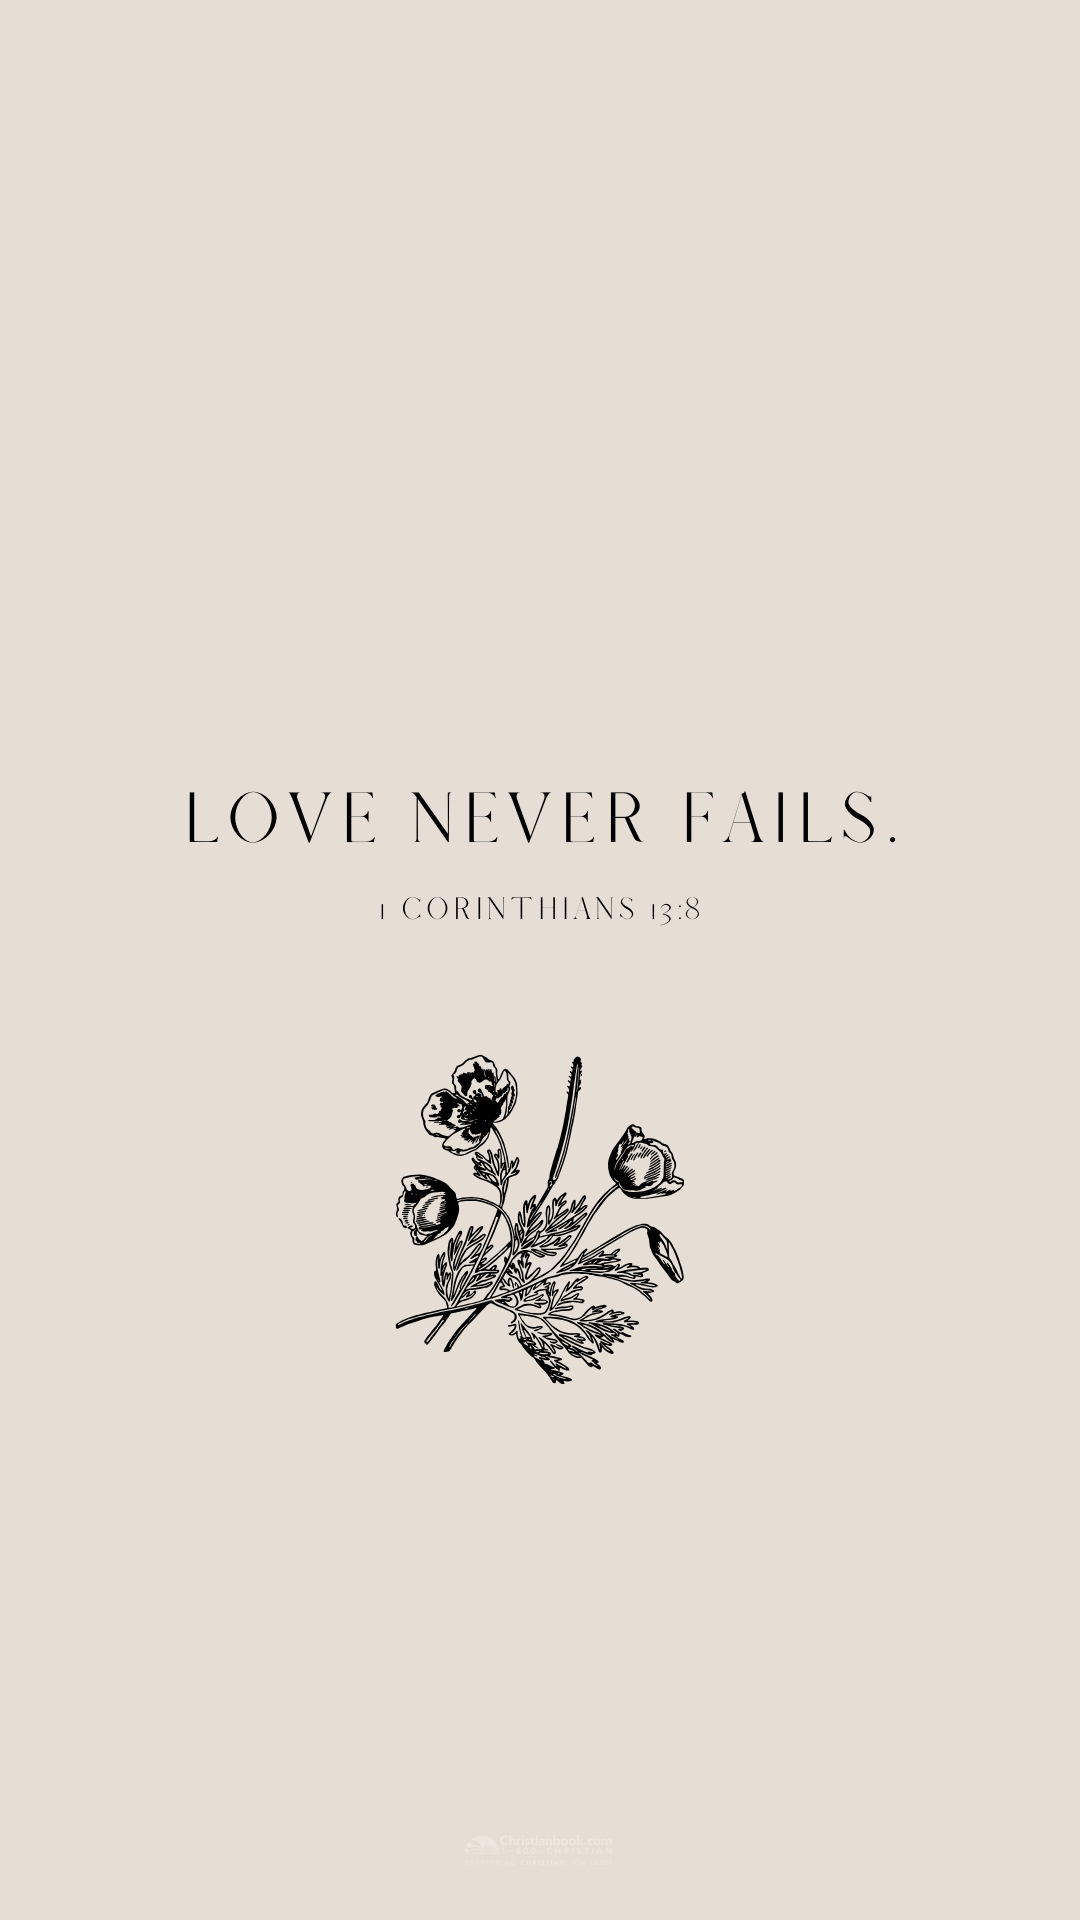 Love never fails a collection of quotes - Christian iPhone